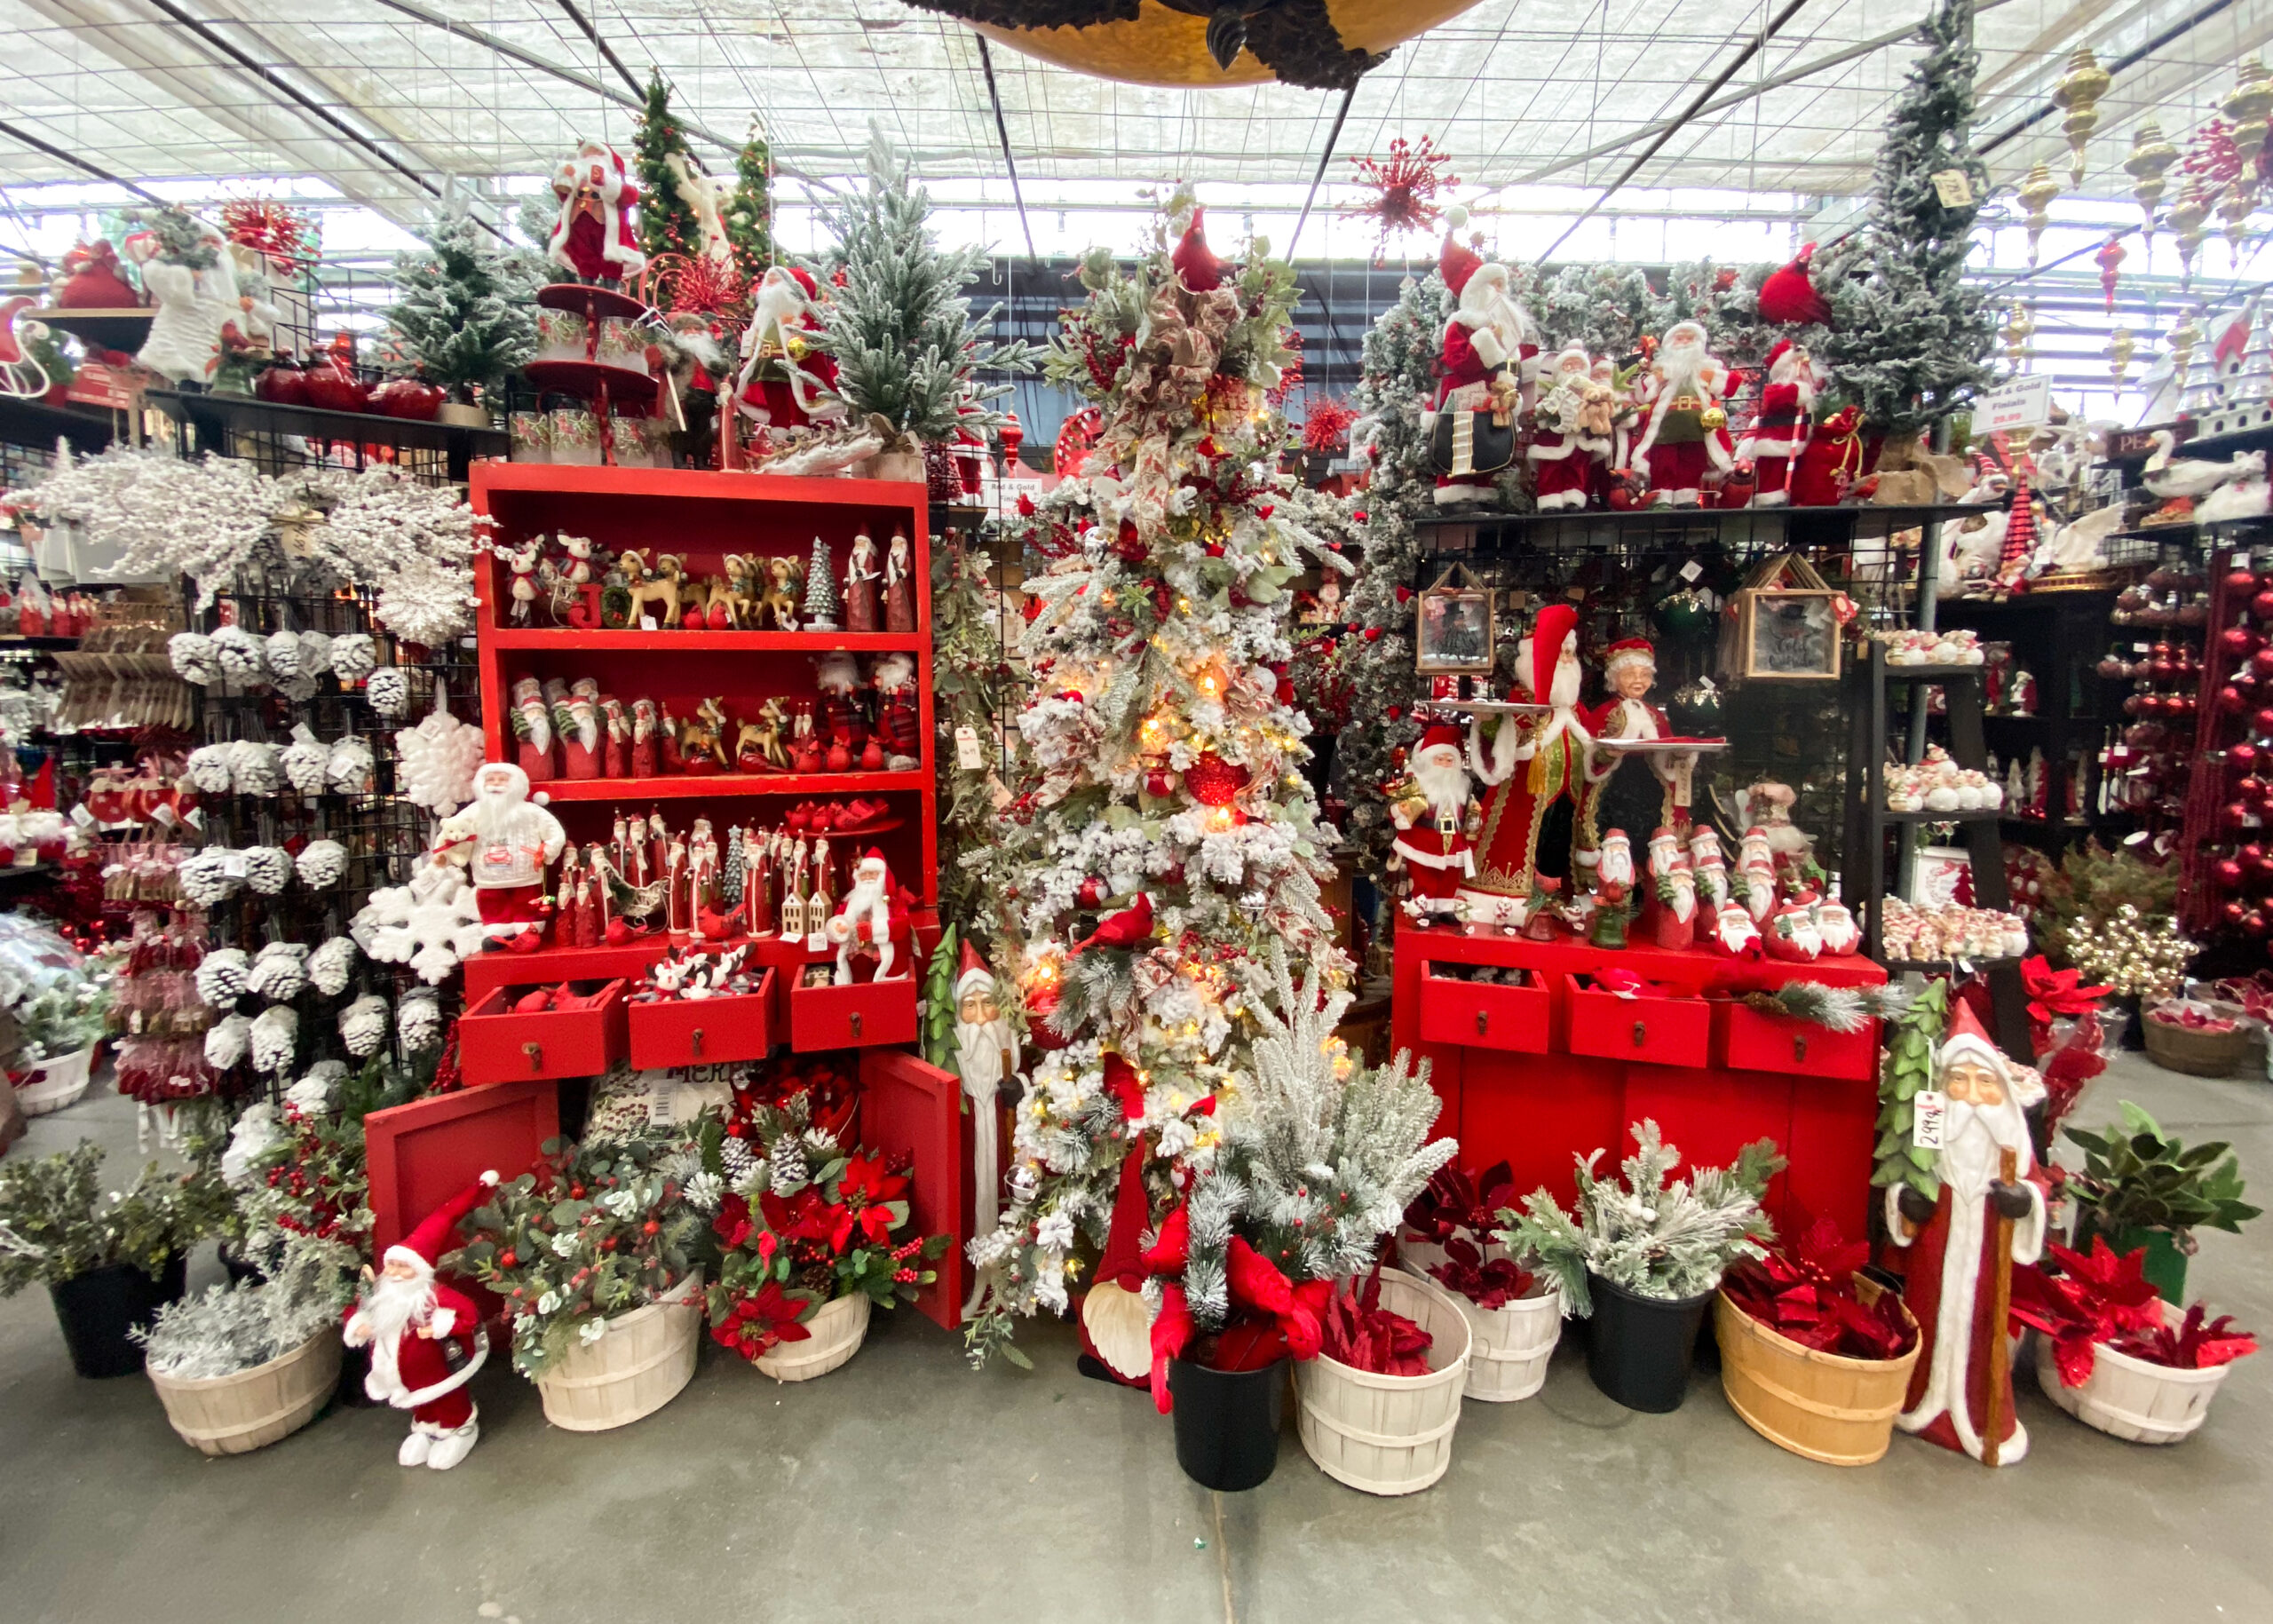 A vivid display of christmas decorations at Potter’s Nursery’s Christmas store, with snowy plastic christmas trees, santas, and other ornaments.